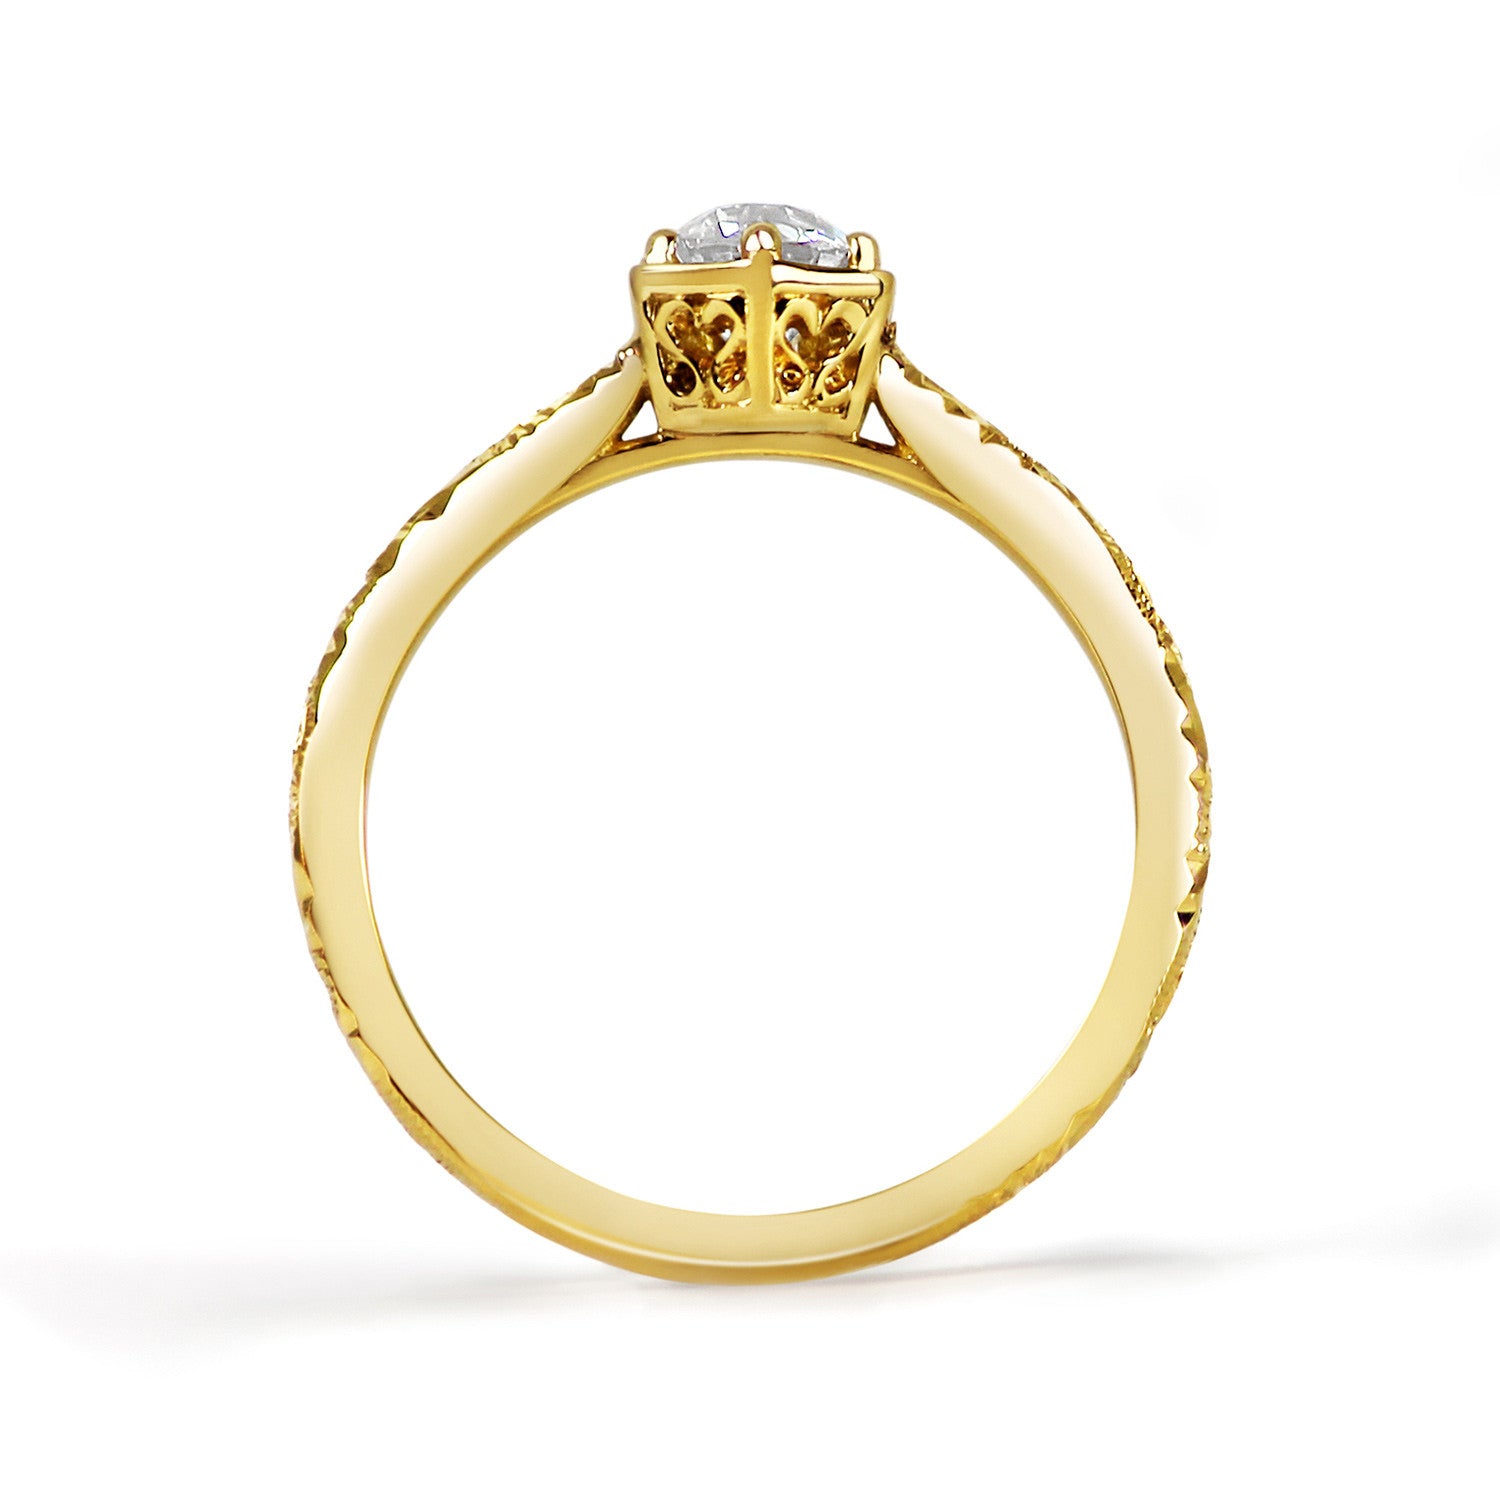 Bespoke Ed engagement ring - Fairtrade yellow gold, Canadian diamond and scroll engraving